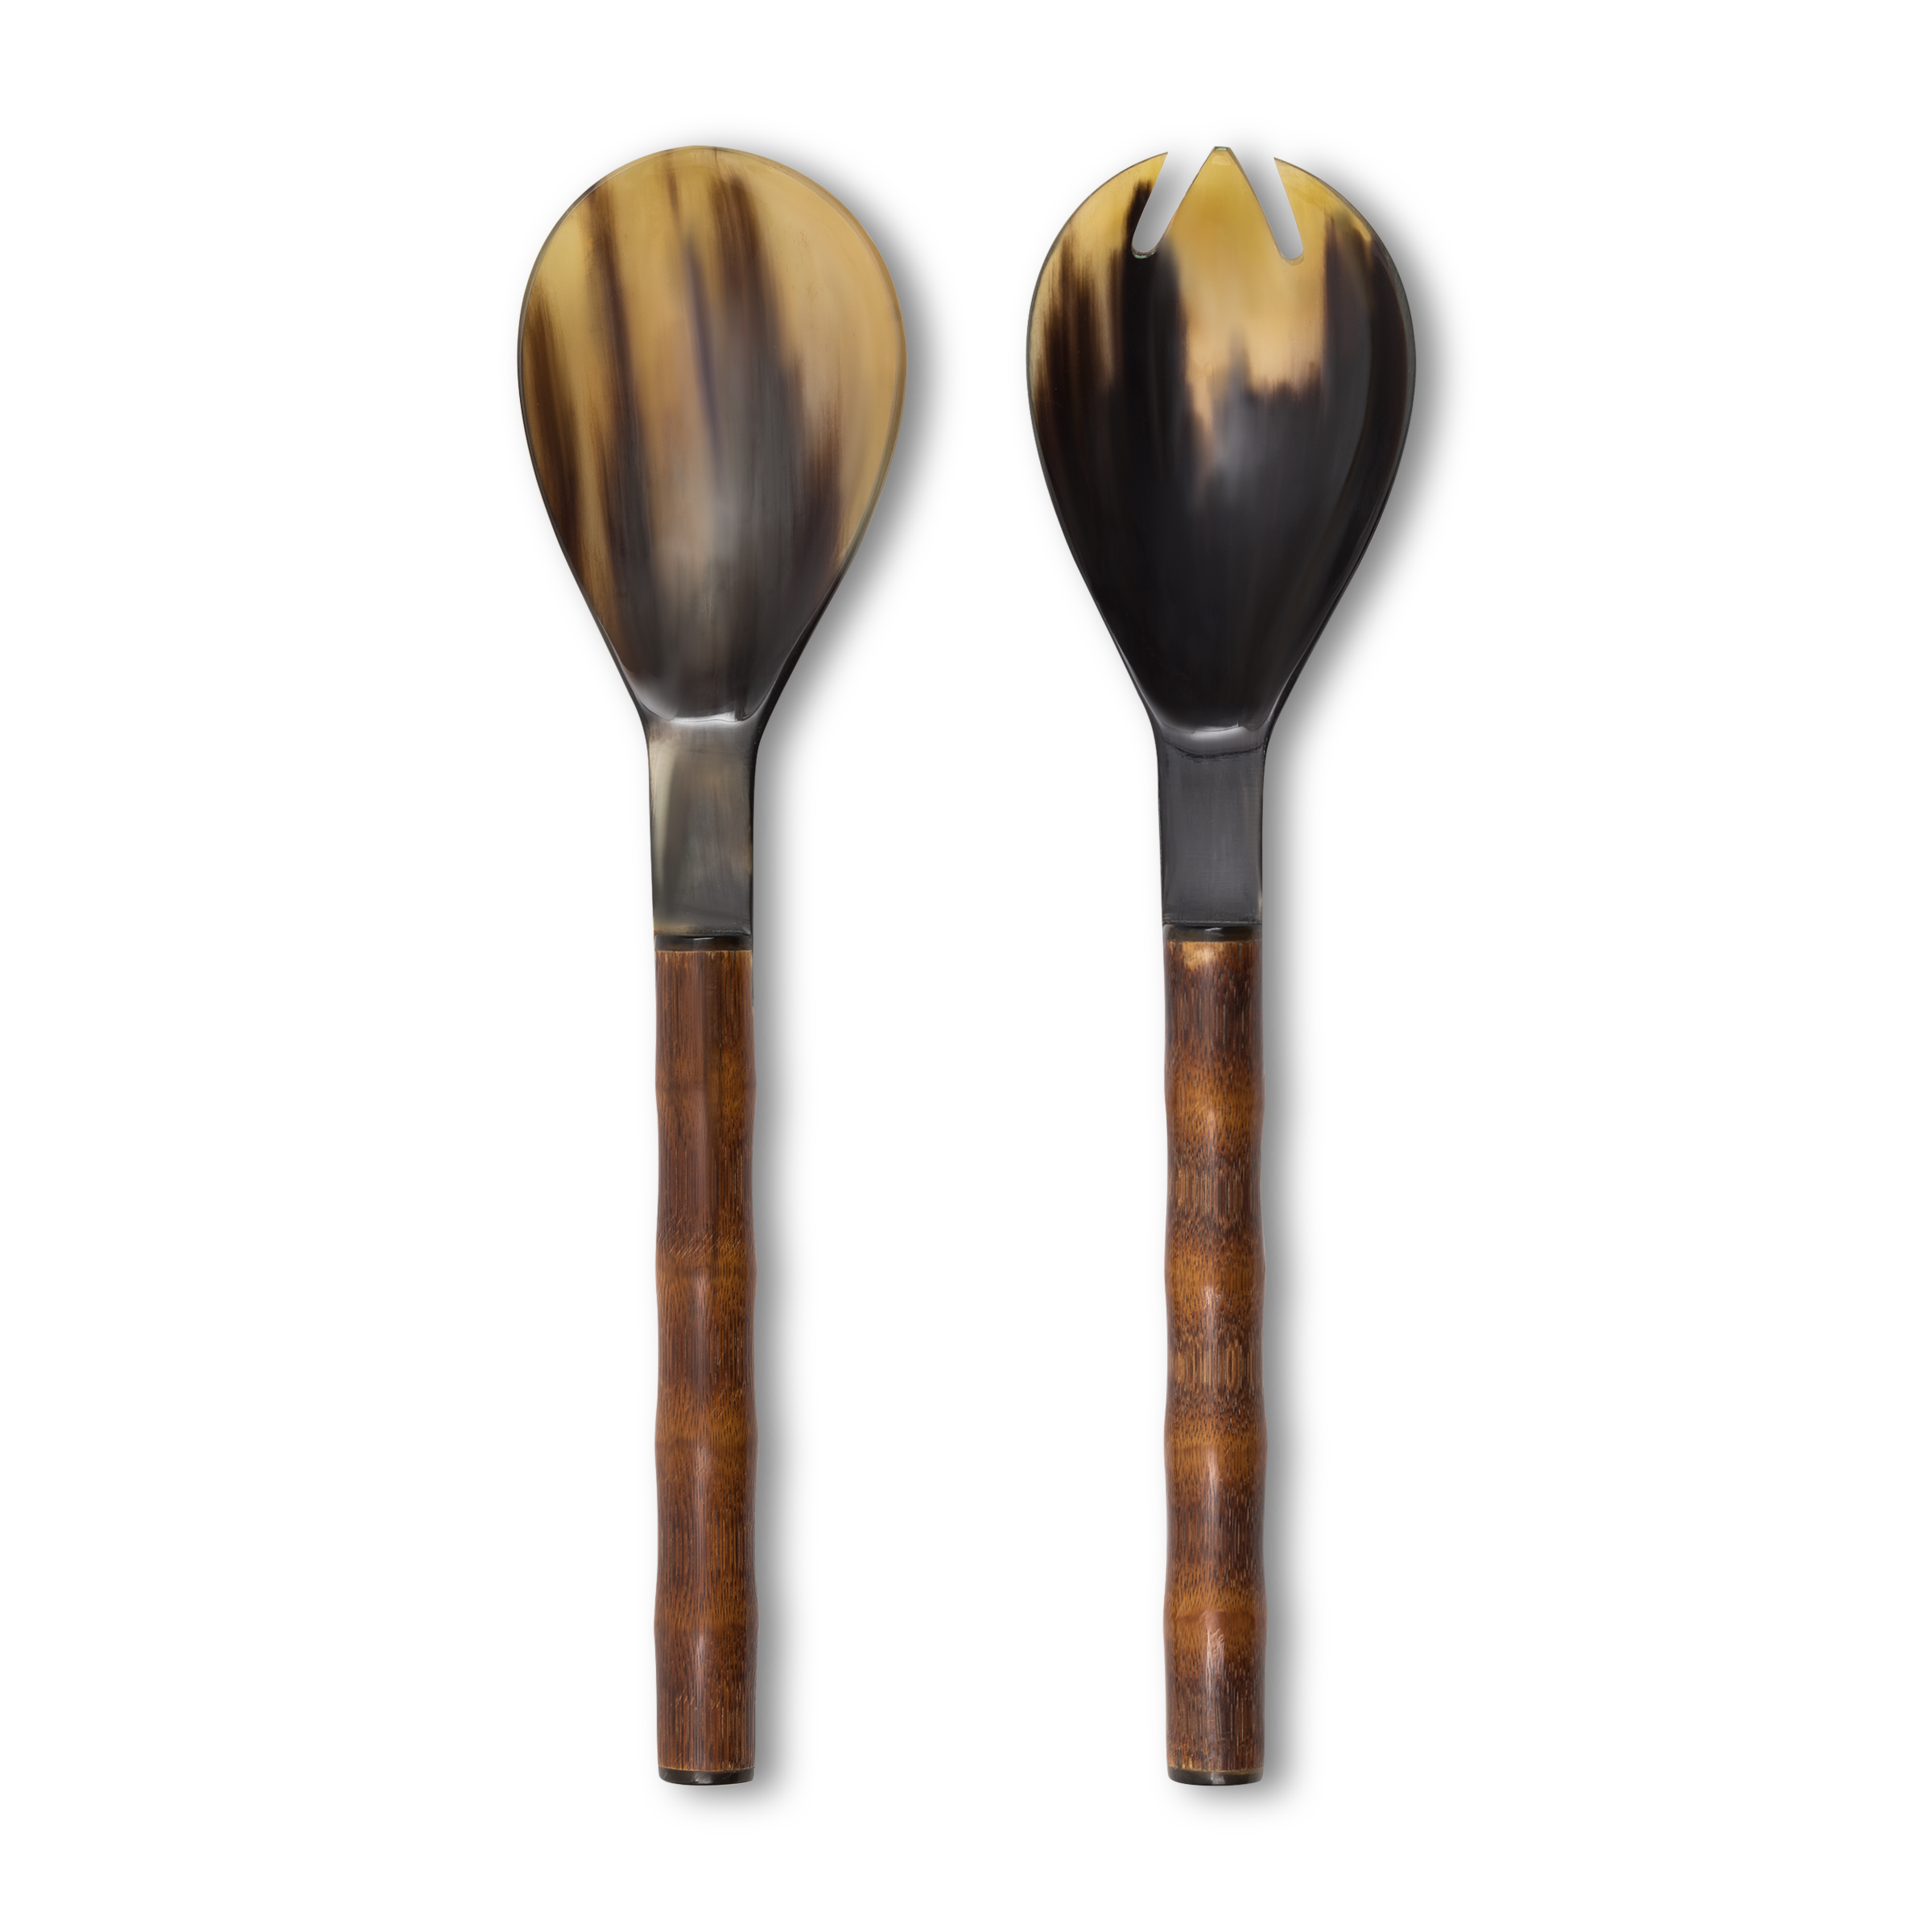 Bamboo Salad Servers ($55) / The Chinoiserie